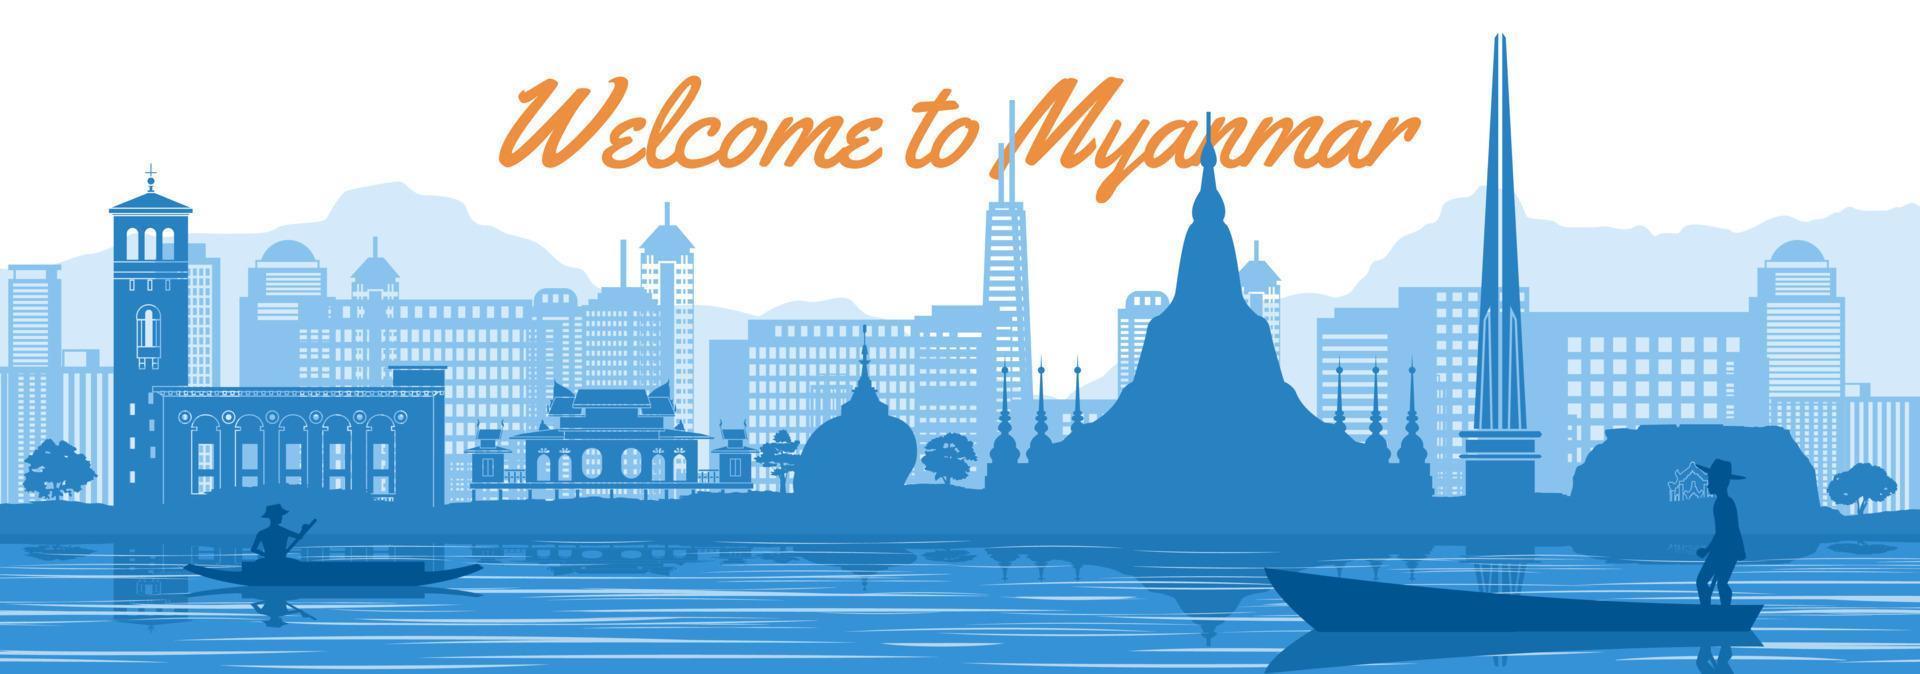 Myanmar famous landmark silhouette style behind river and boat and in front of towers vector